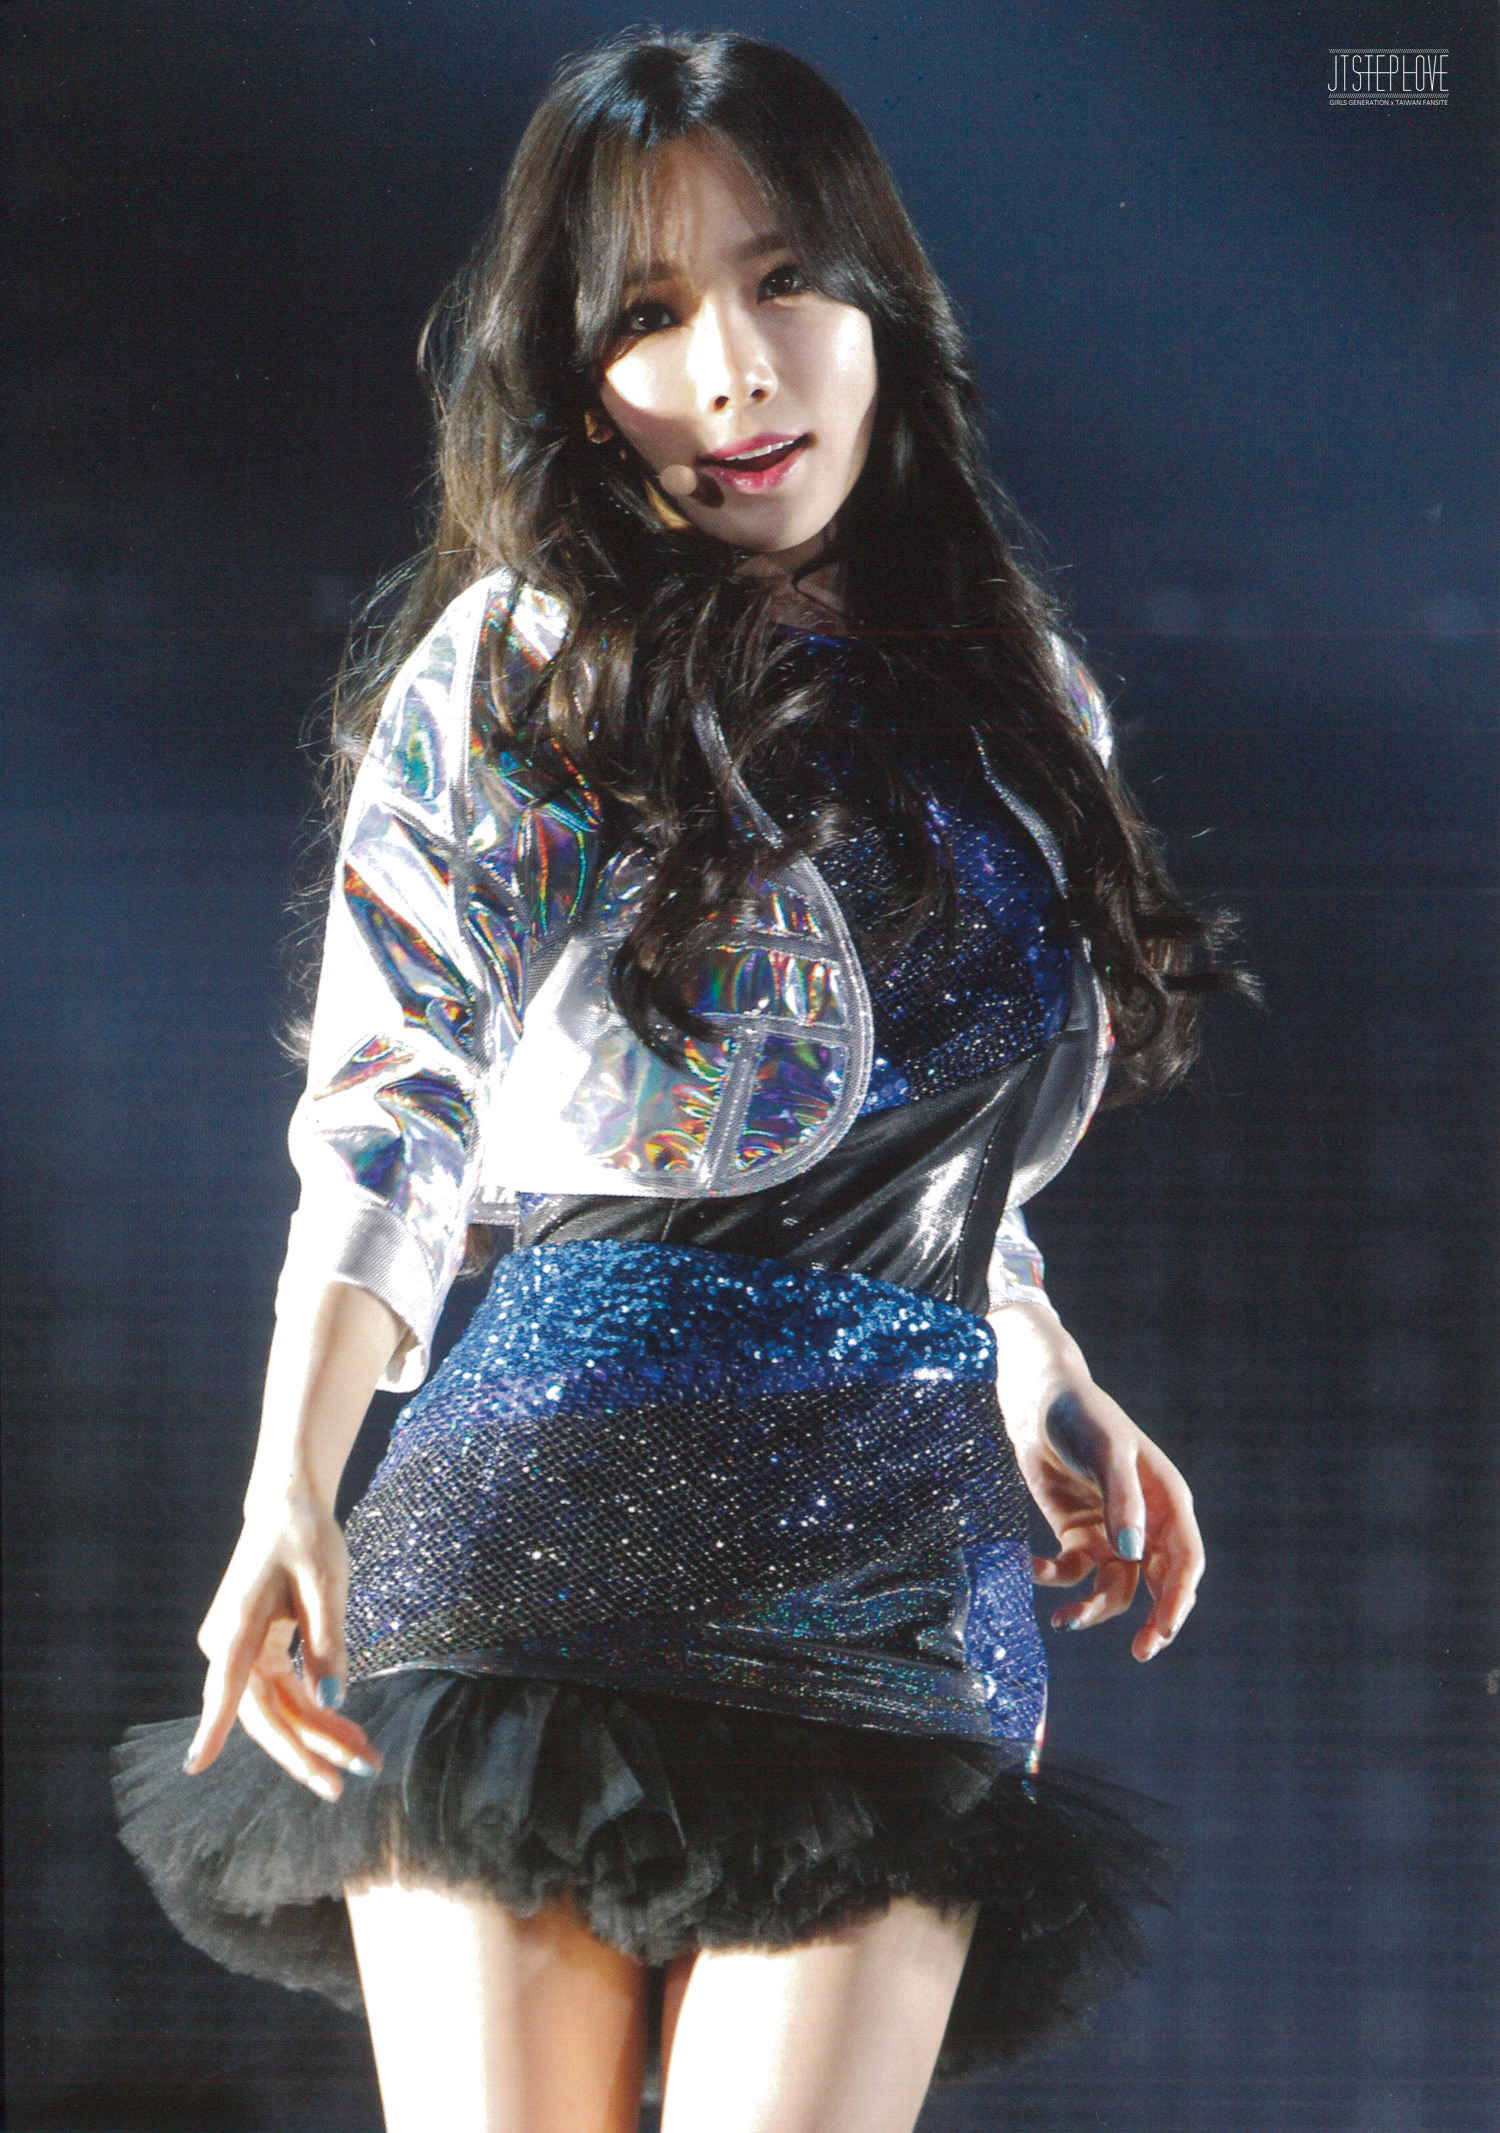 SCAN] Girls' Generation 'The Best Live' in Tokyo Dome by 